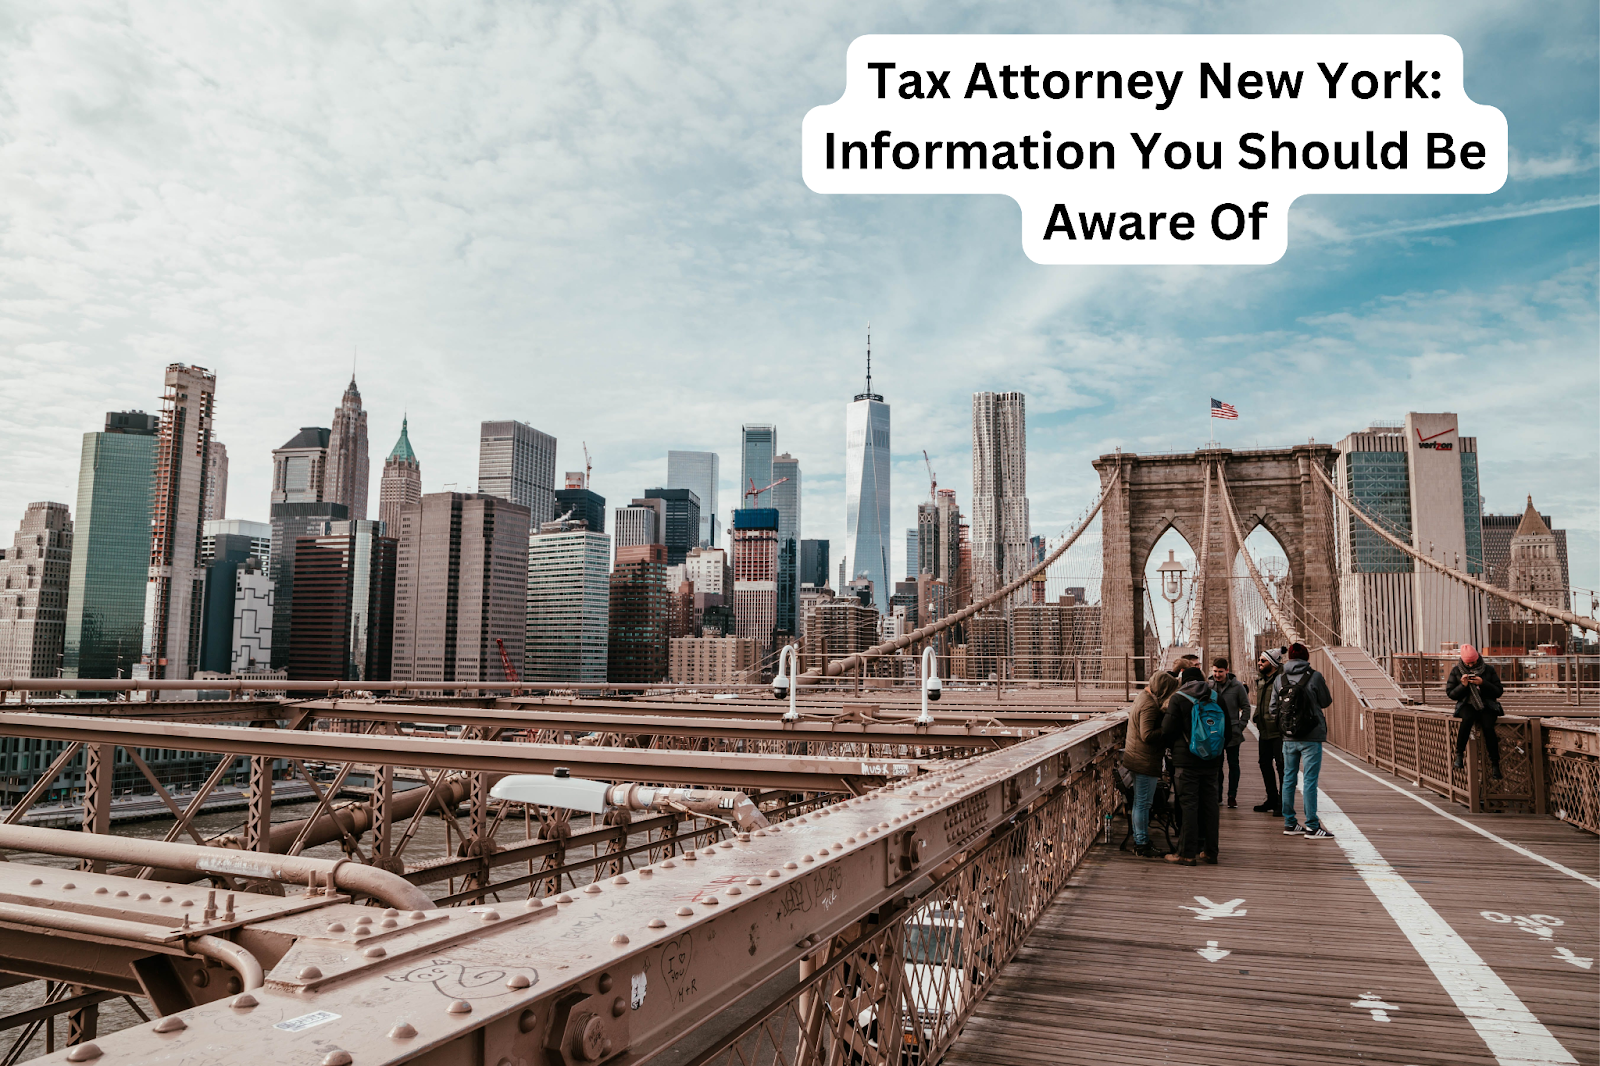 Tax Attorney New York: Information You Should Be Aware Of